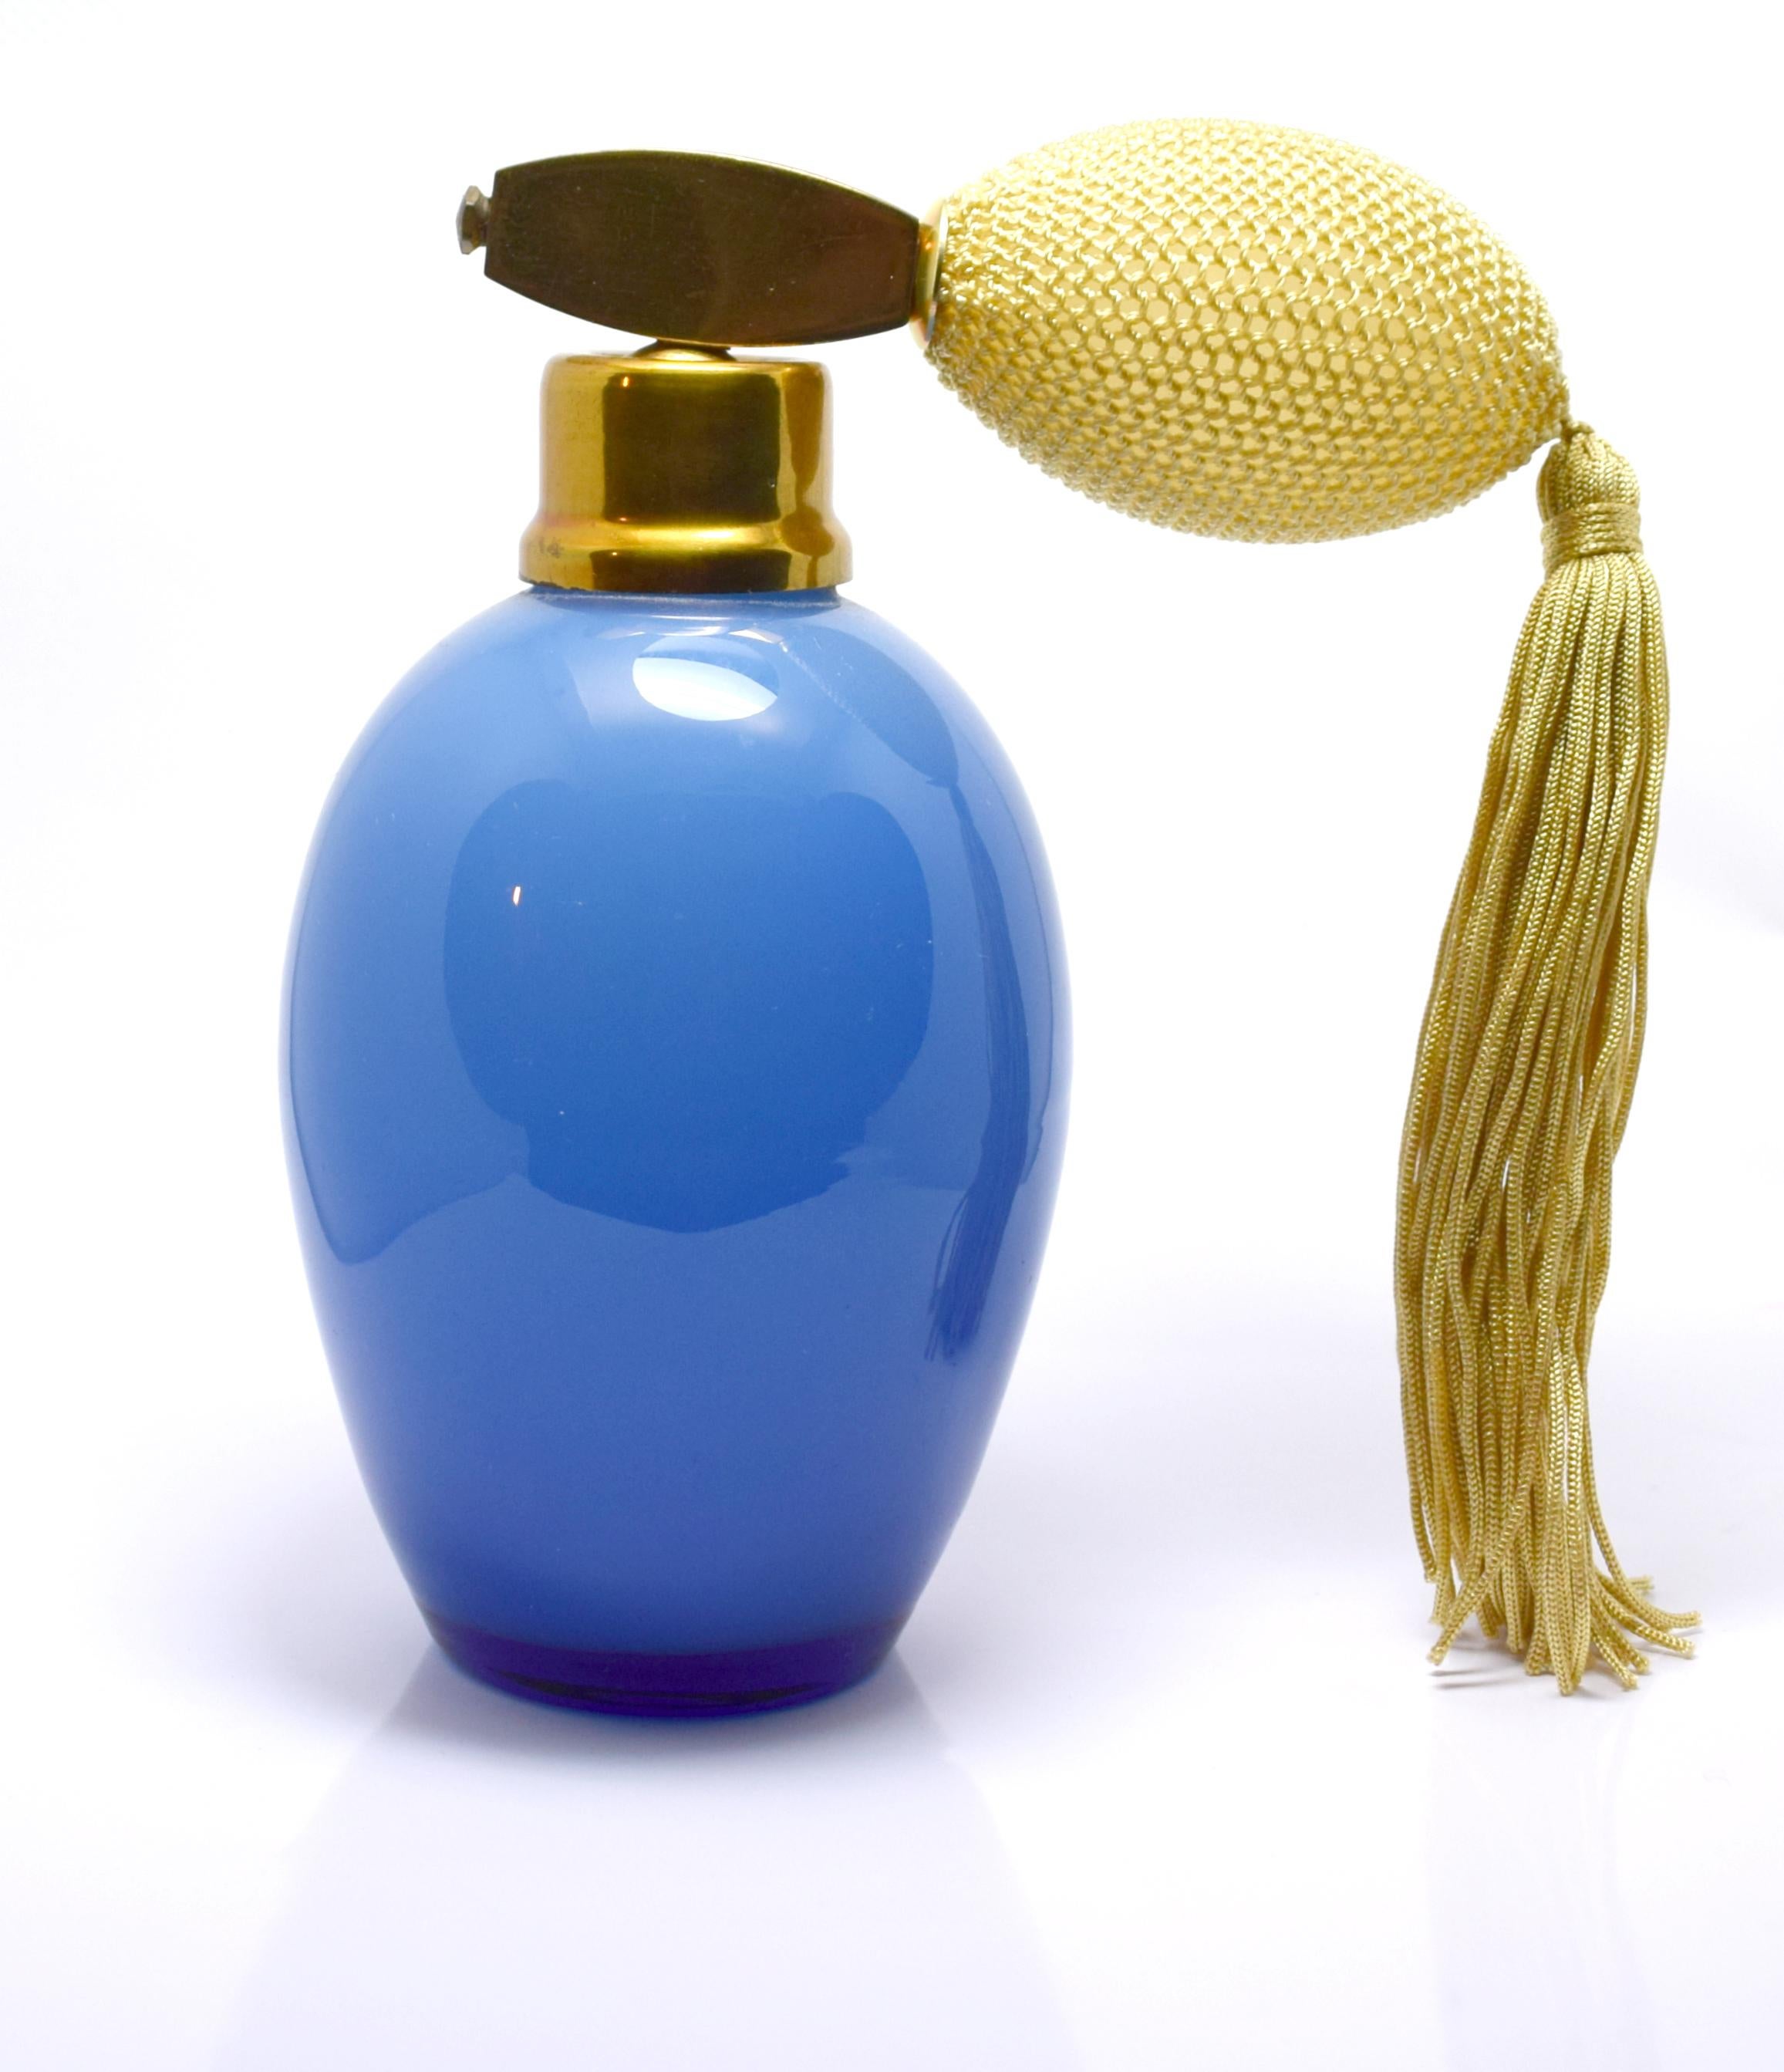 Very stylish Art Deco 1930s blue glass perfume bottle atomiser with a champagne colored tasselled bulb. Wonderful condition showing only very minor wear to the brass tip. Glass is perfect and free from damage. Will look beautiful on a dressing table.